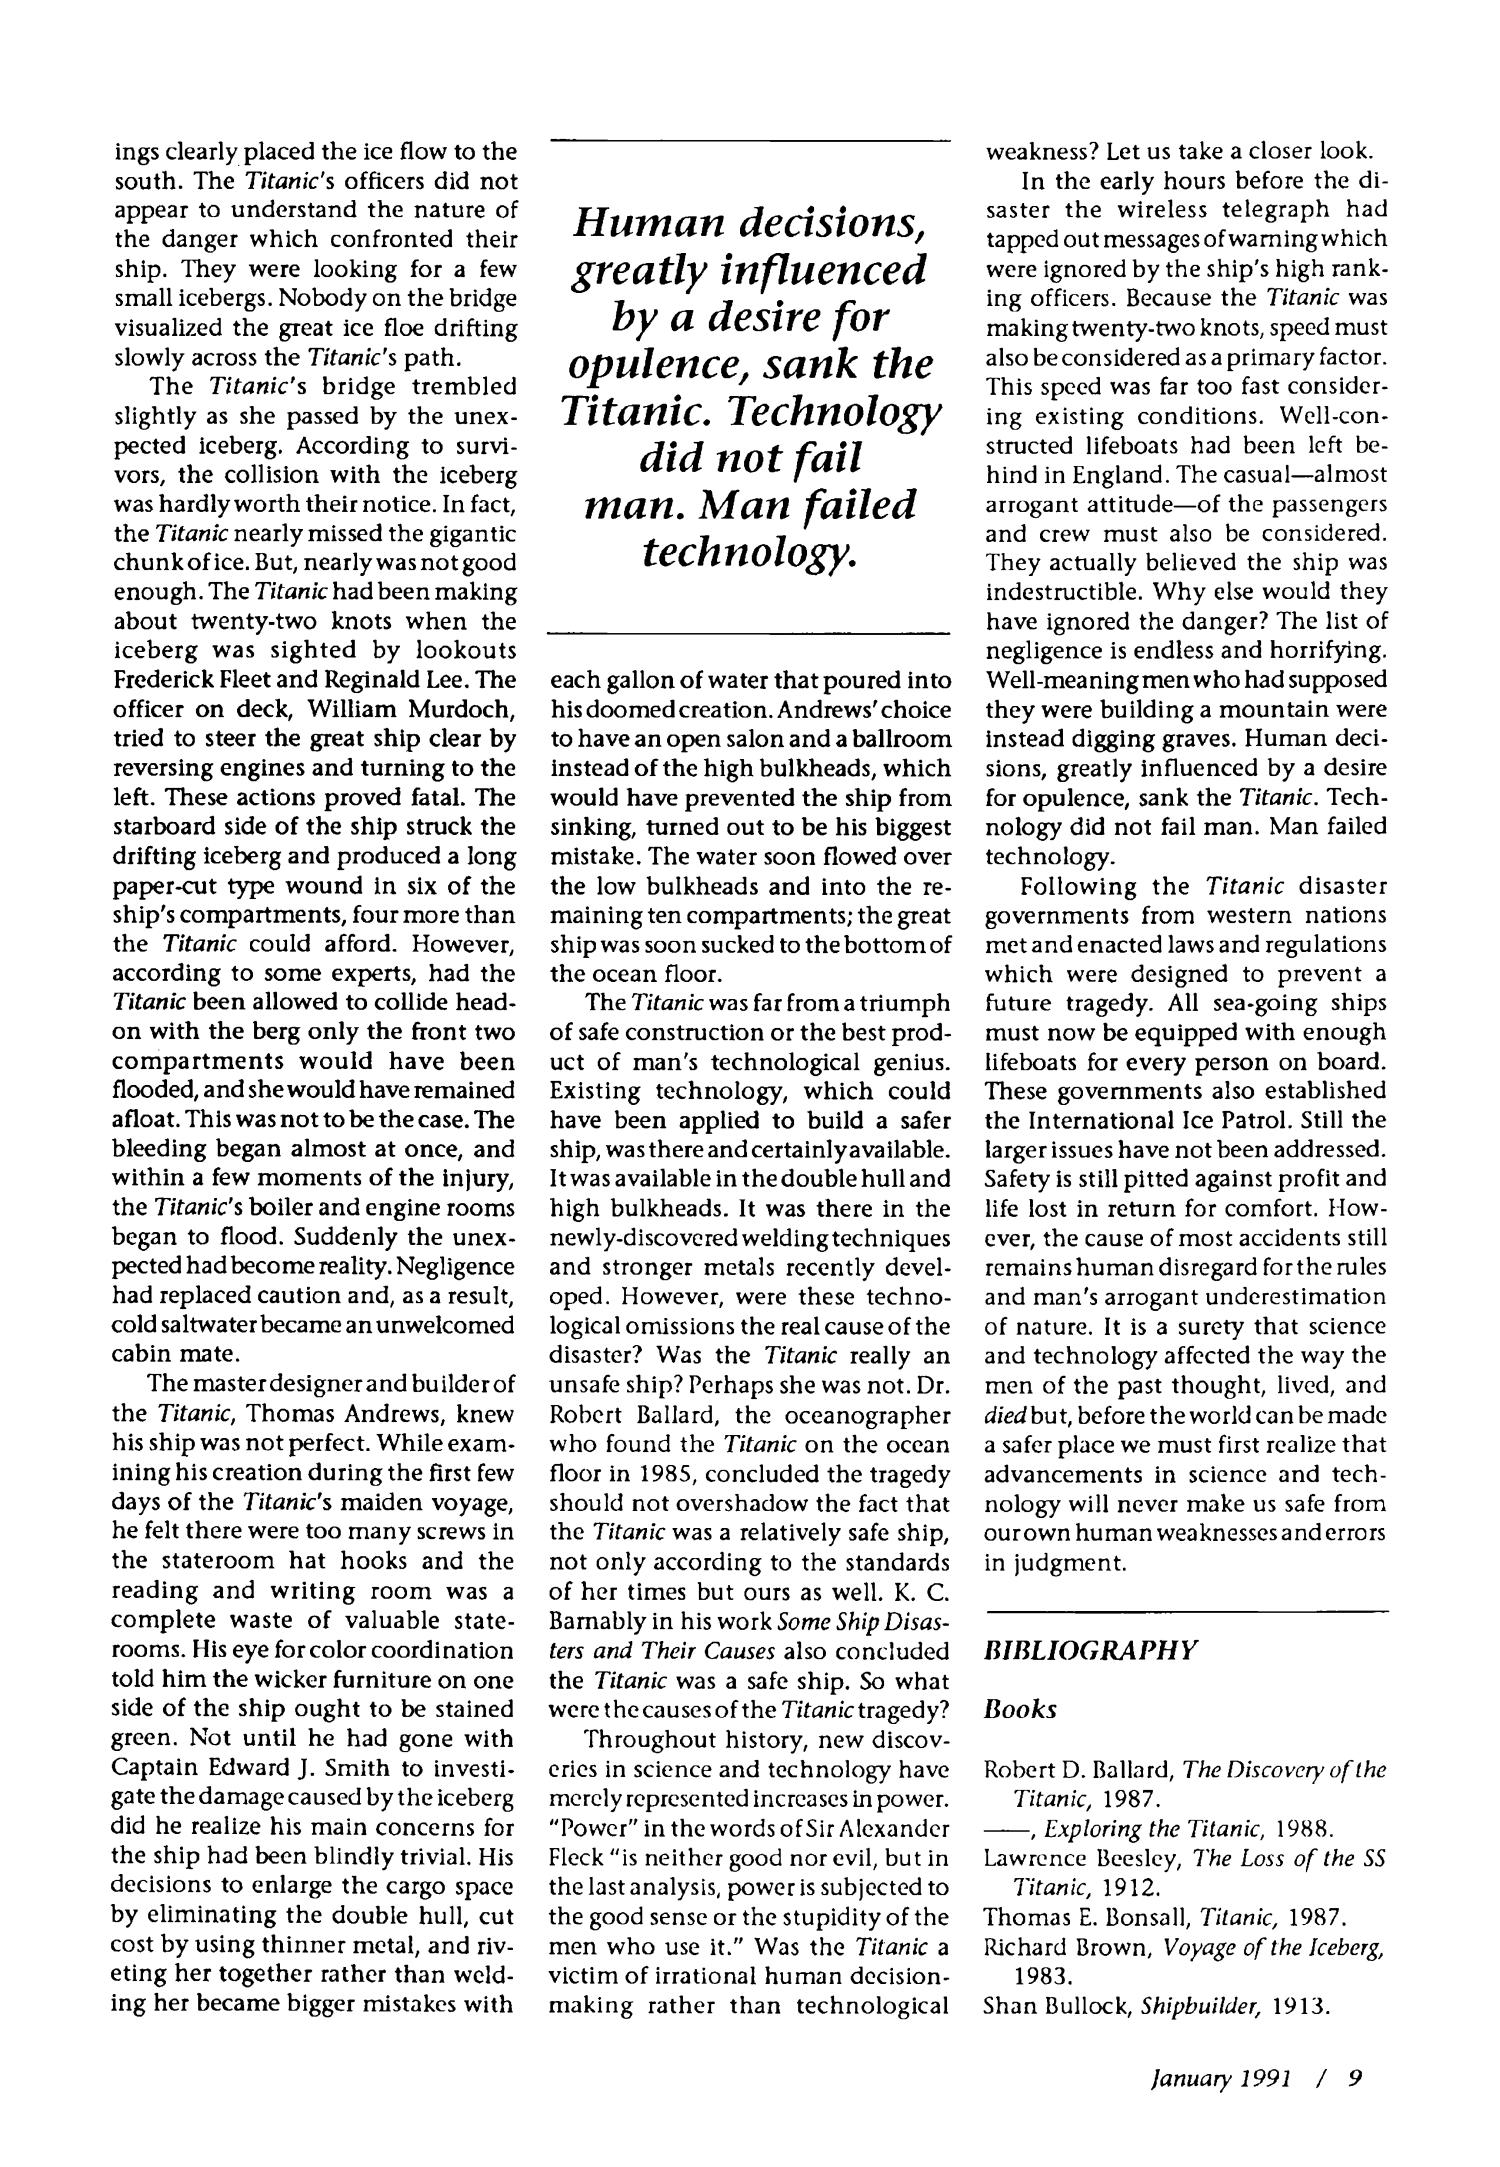 The Texas Historian, Volume 51, Number 3, January 1991
                                                
                                                    9
                                                